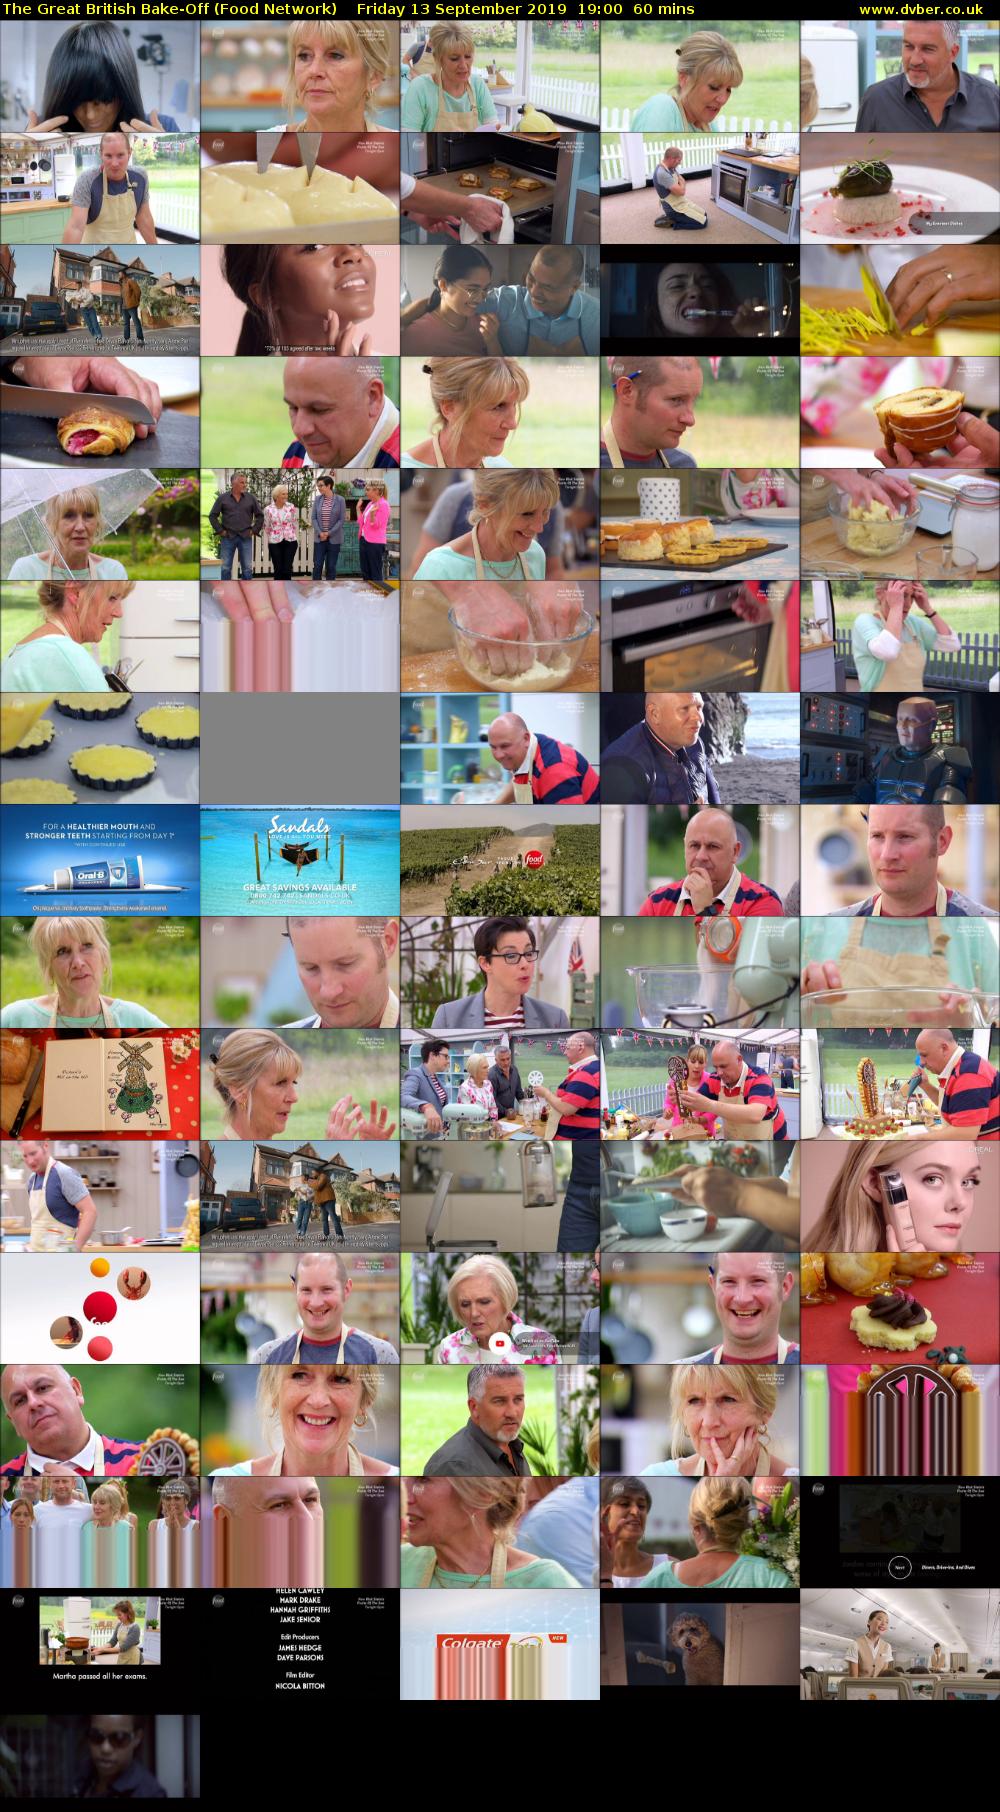 The Great British Bake-Off (Food Network) Friday 13 September 2019 19:00 - 20:00